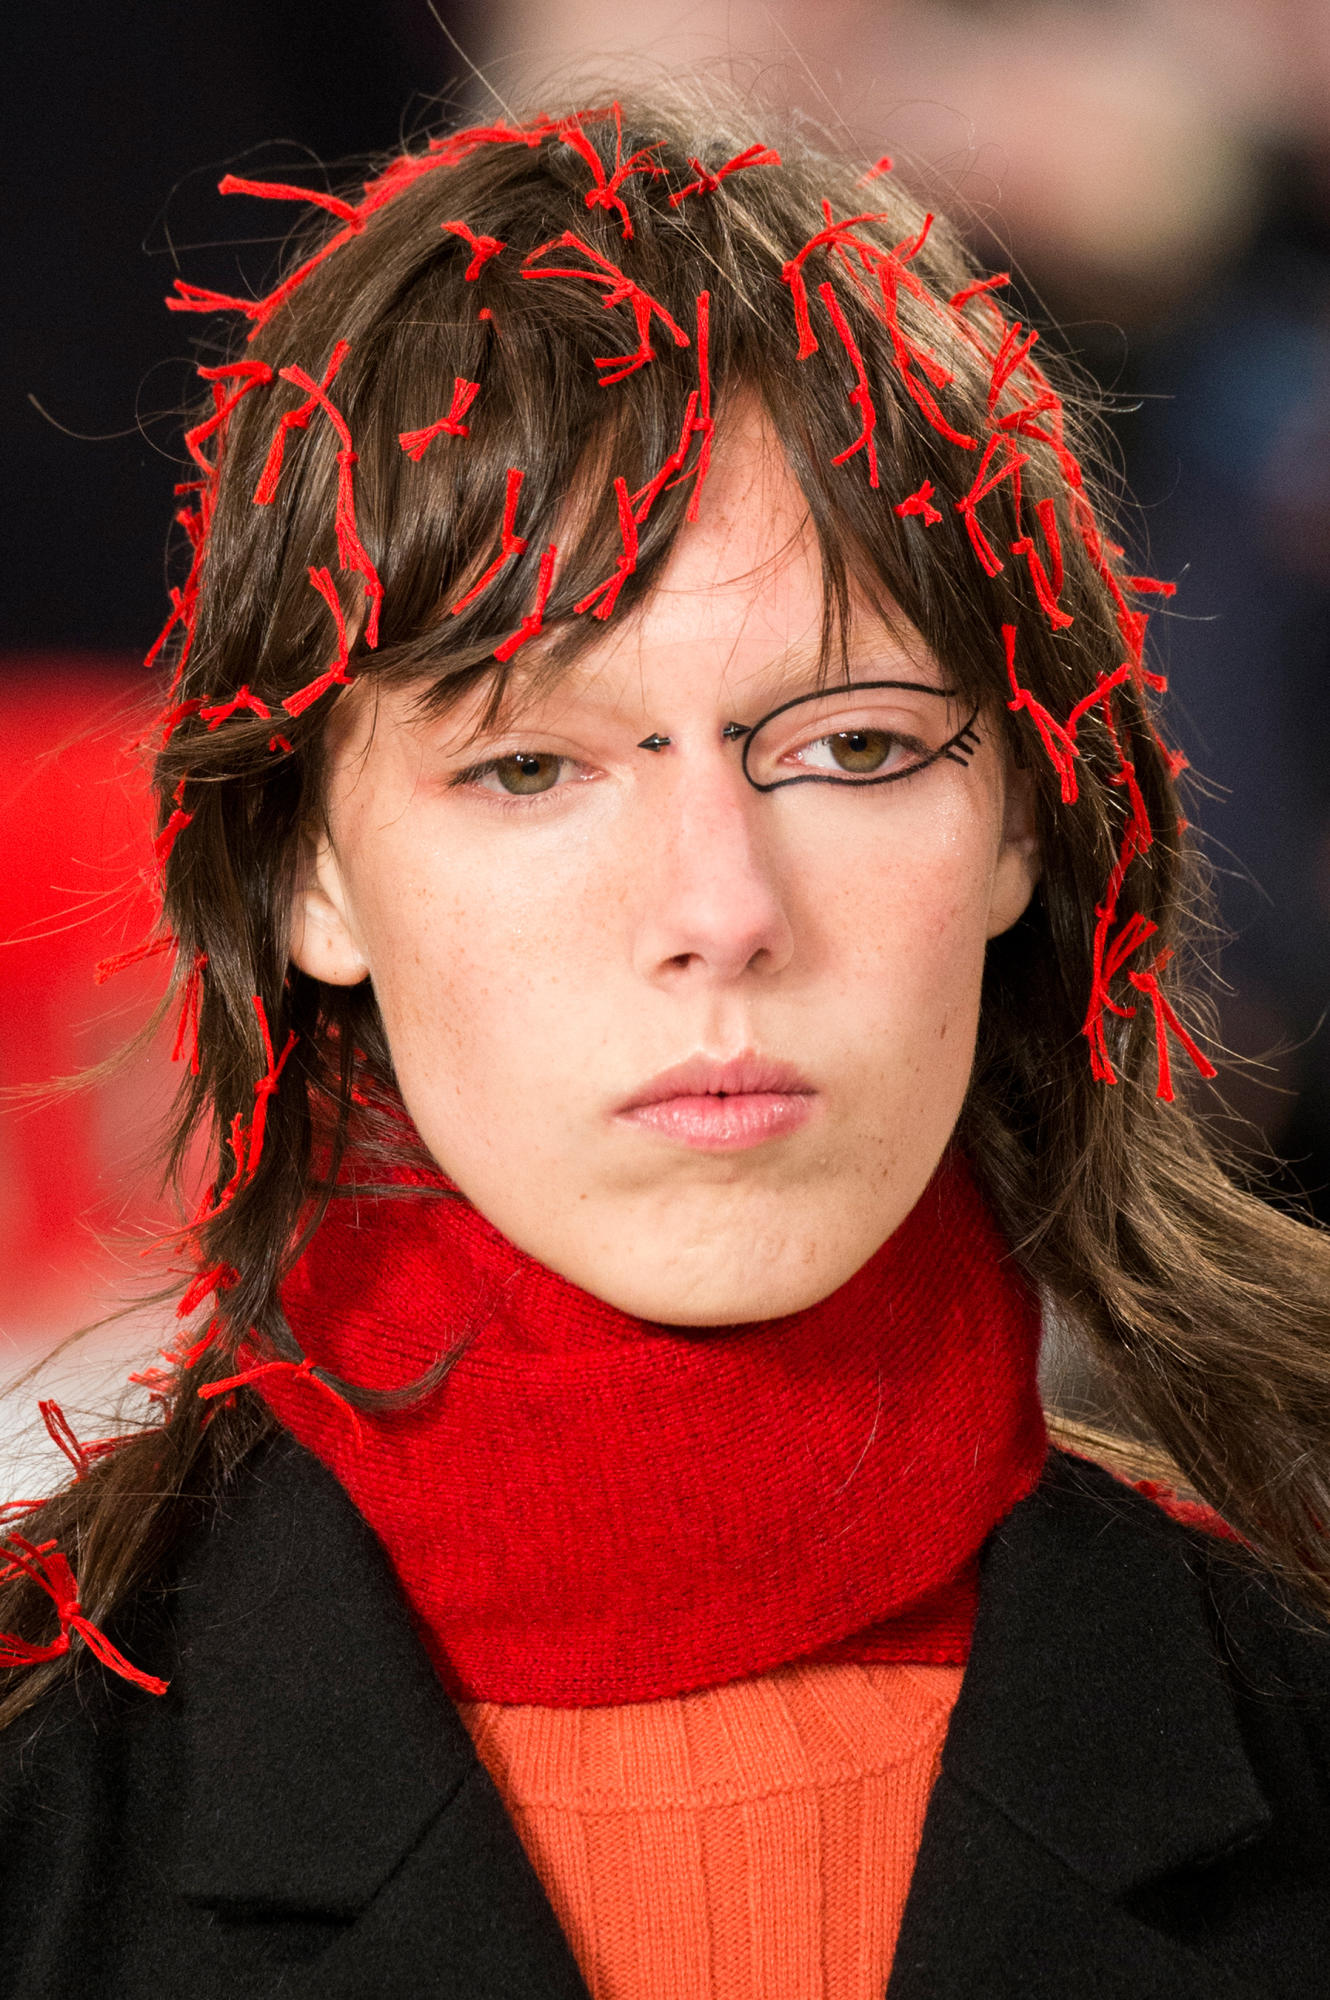 MAISON MARGIELA'S FALL RUNWAY FEATURED FEATHERS AS MAKEUP AND HANDBAGS AS HAIR ACCESSORIES